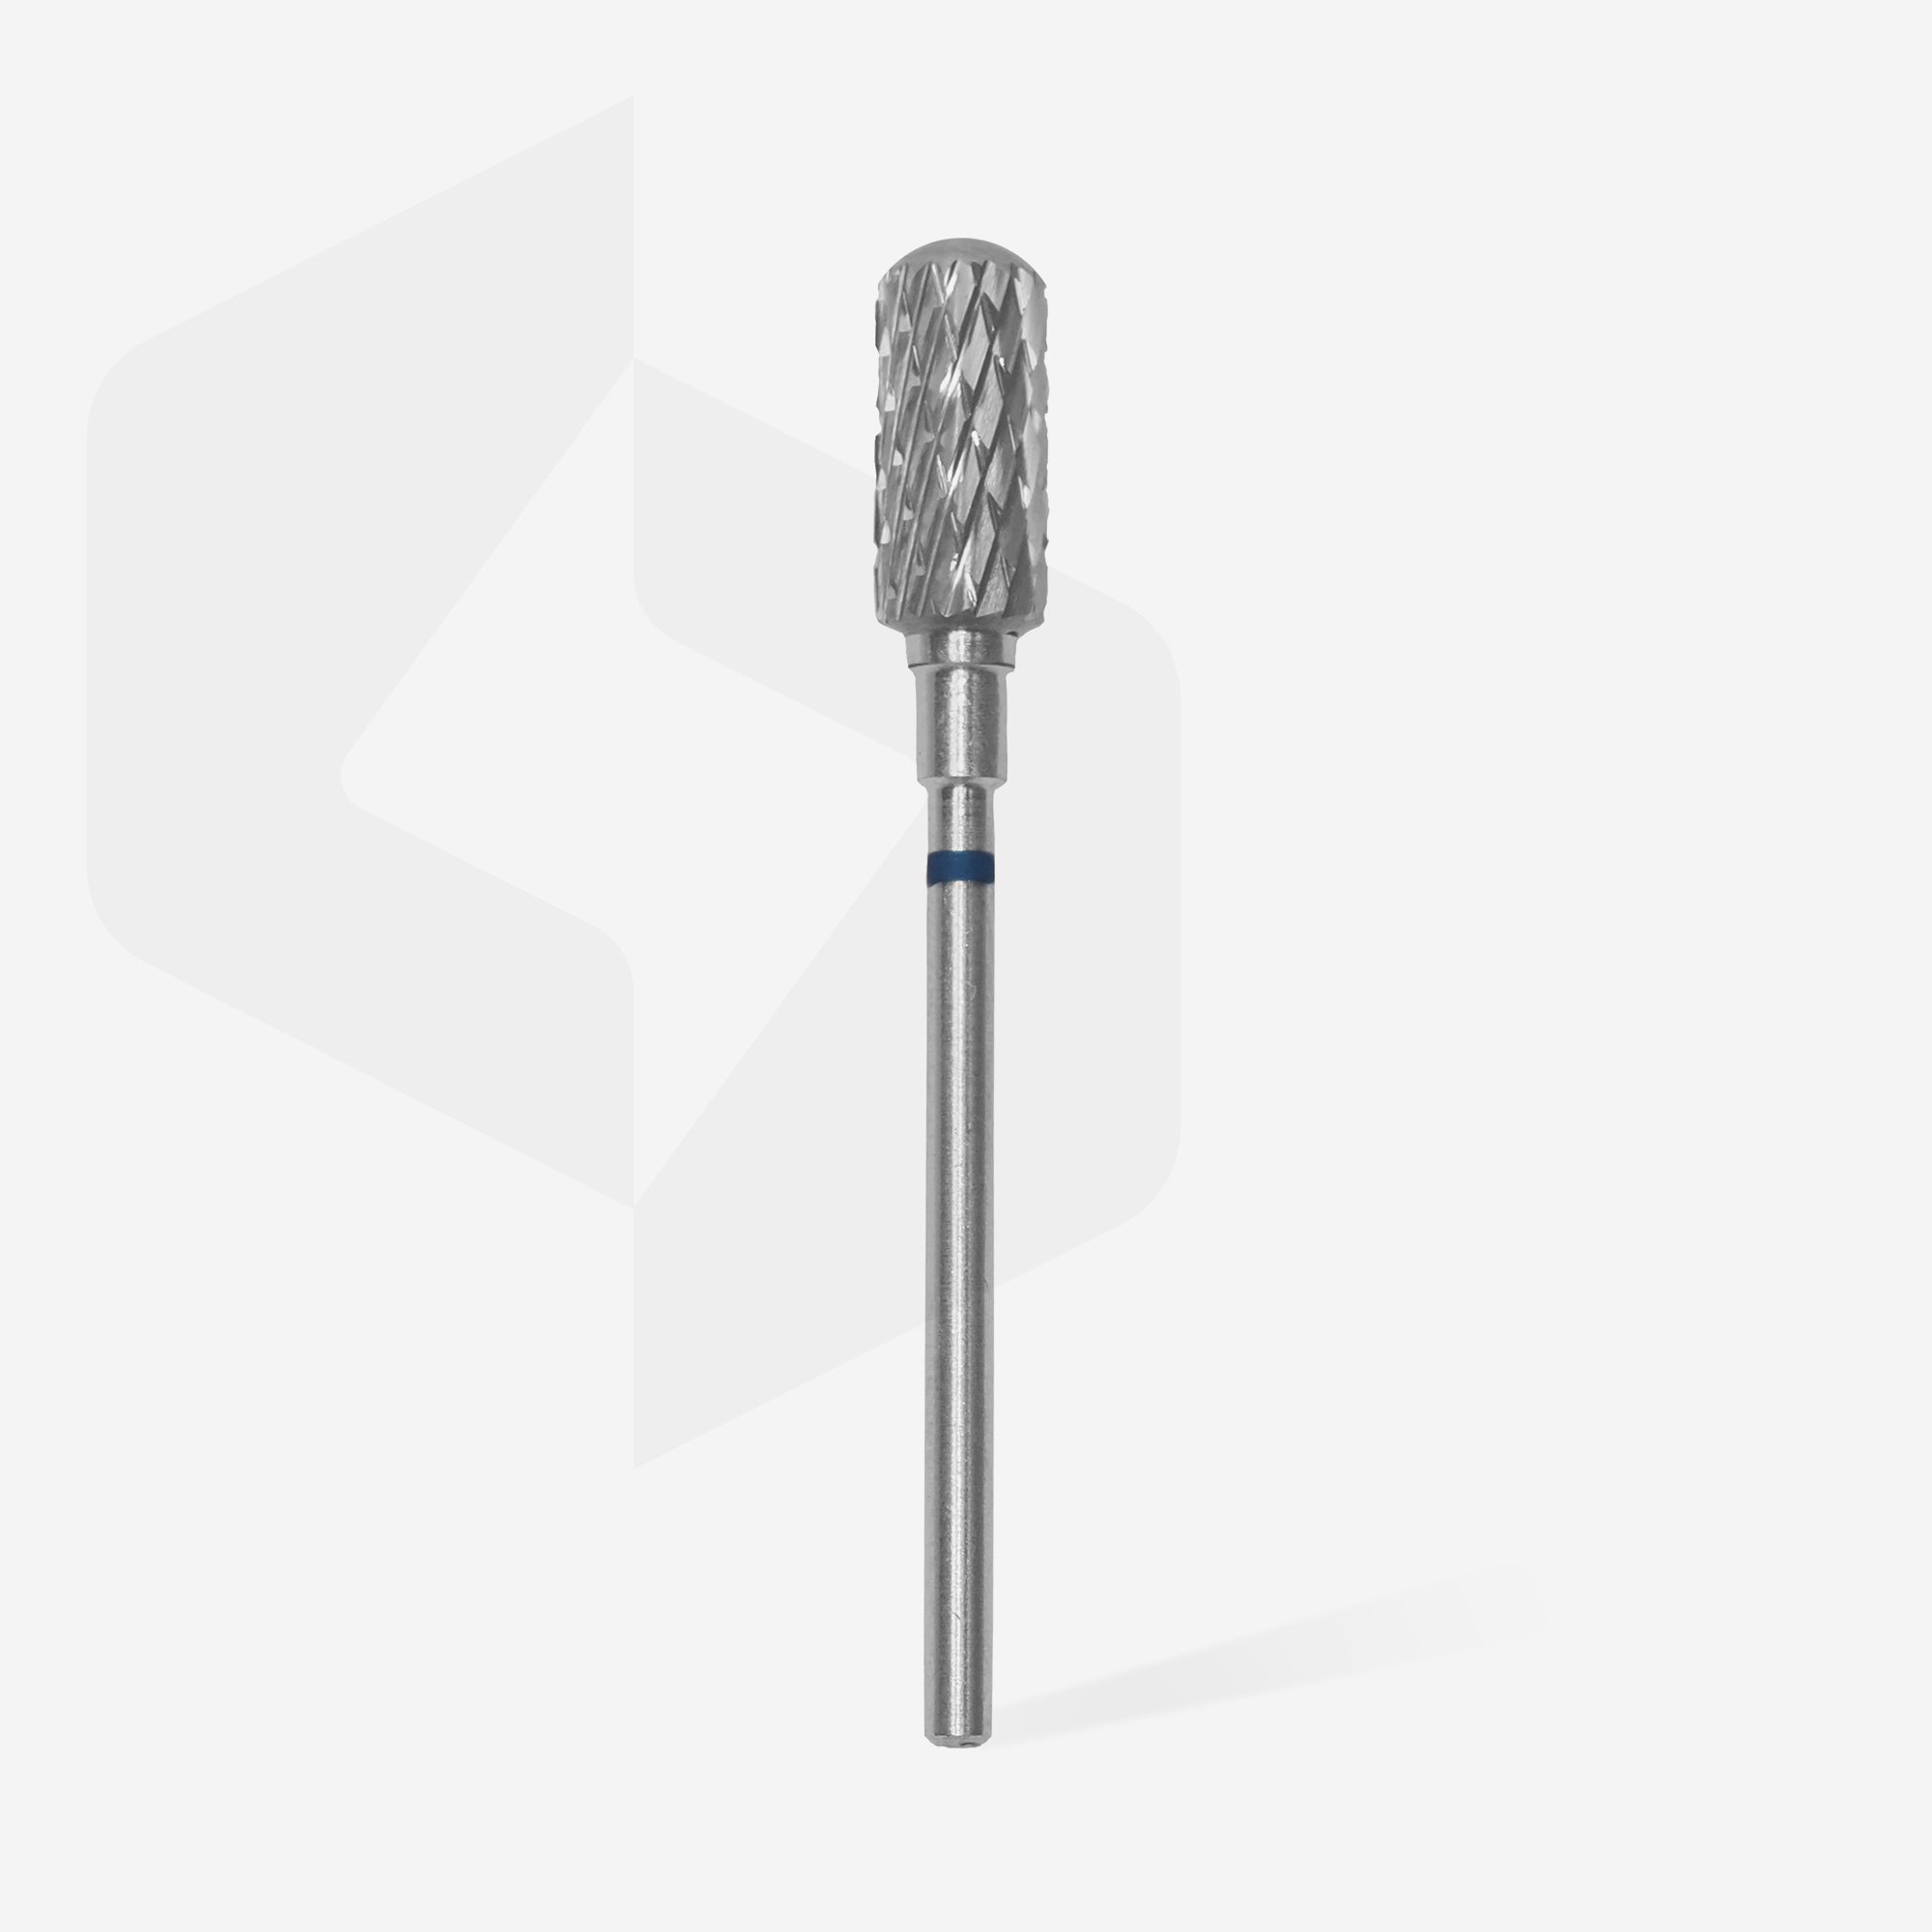 Carbide nail drill bit safe rounded cylinder blue EXPERT head diameter 6 mm/ working part 14 mm